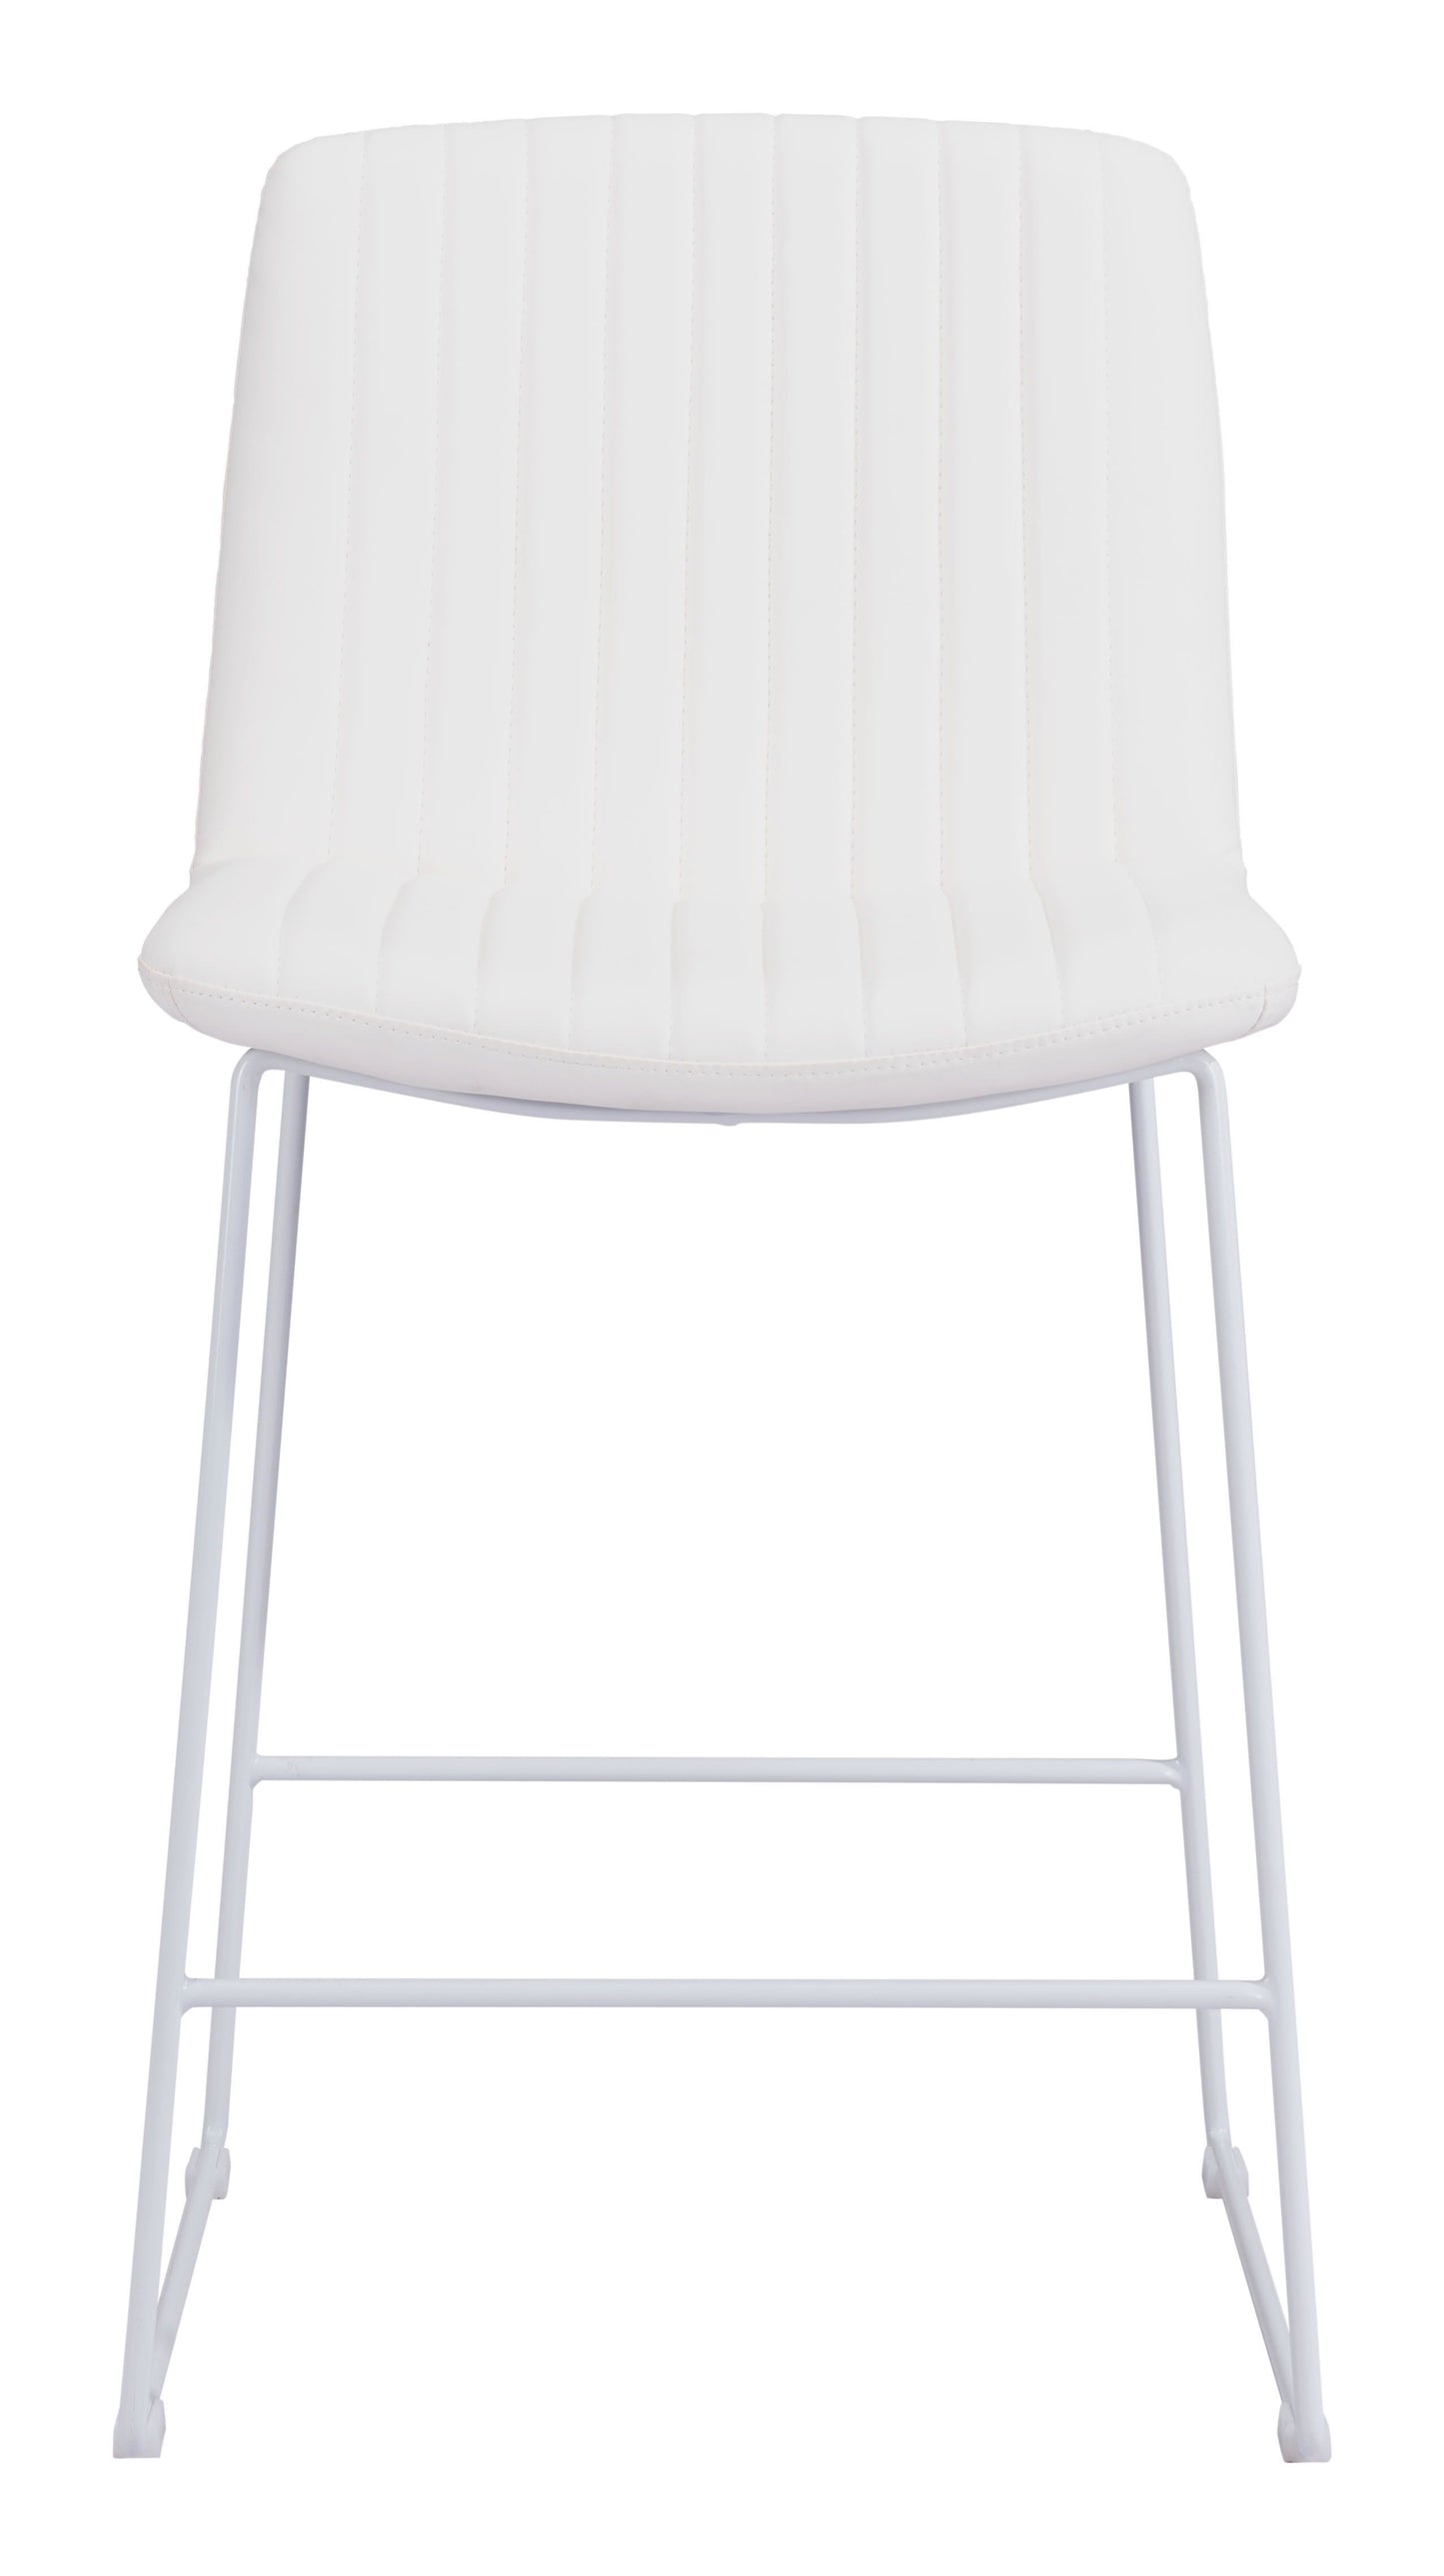 Mode Counter Chair White